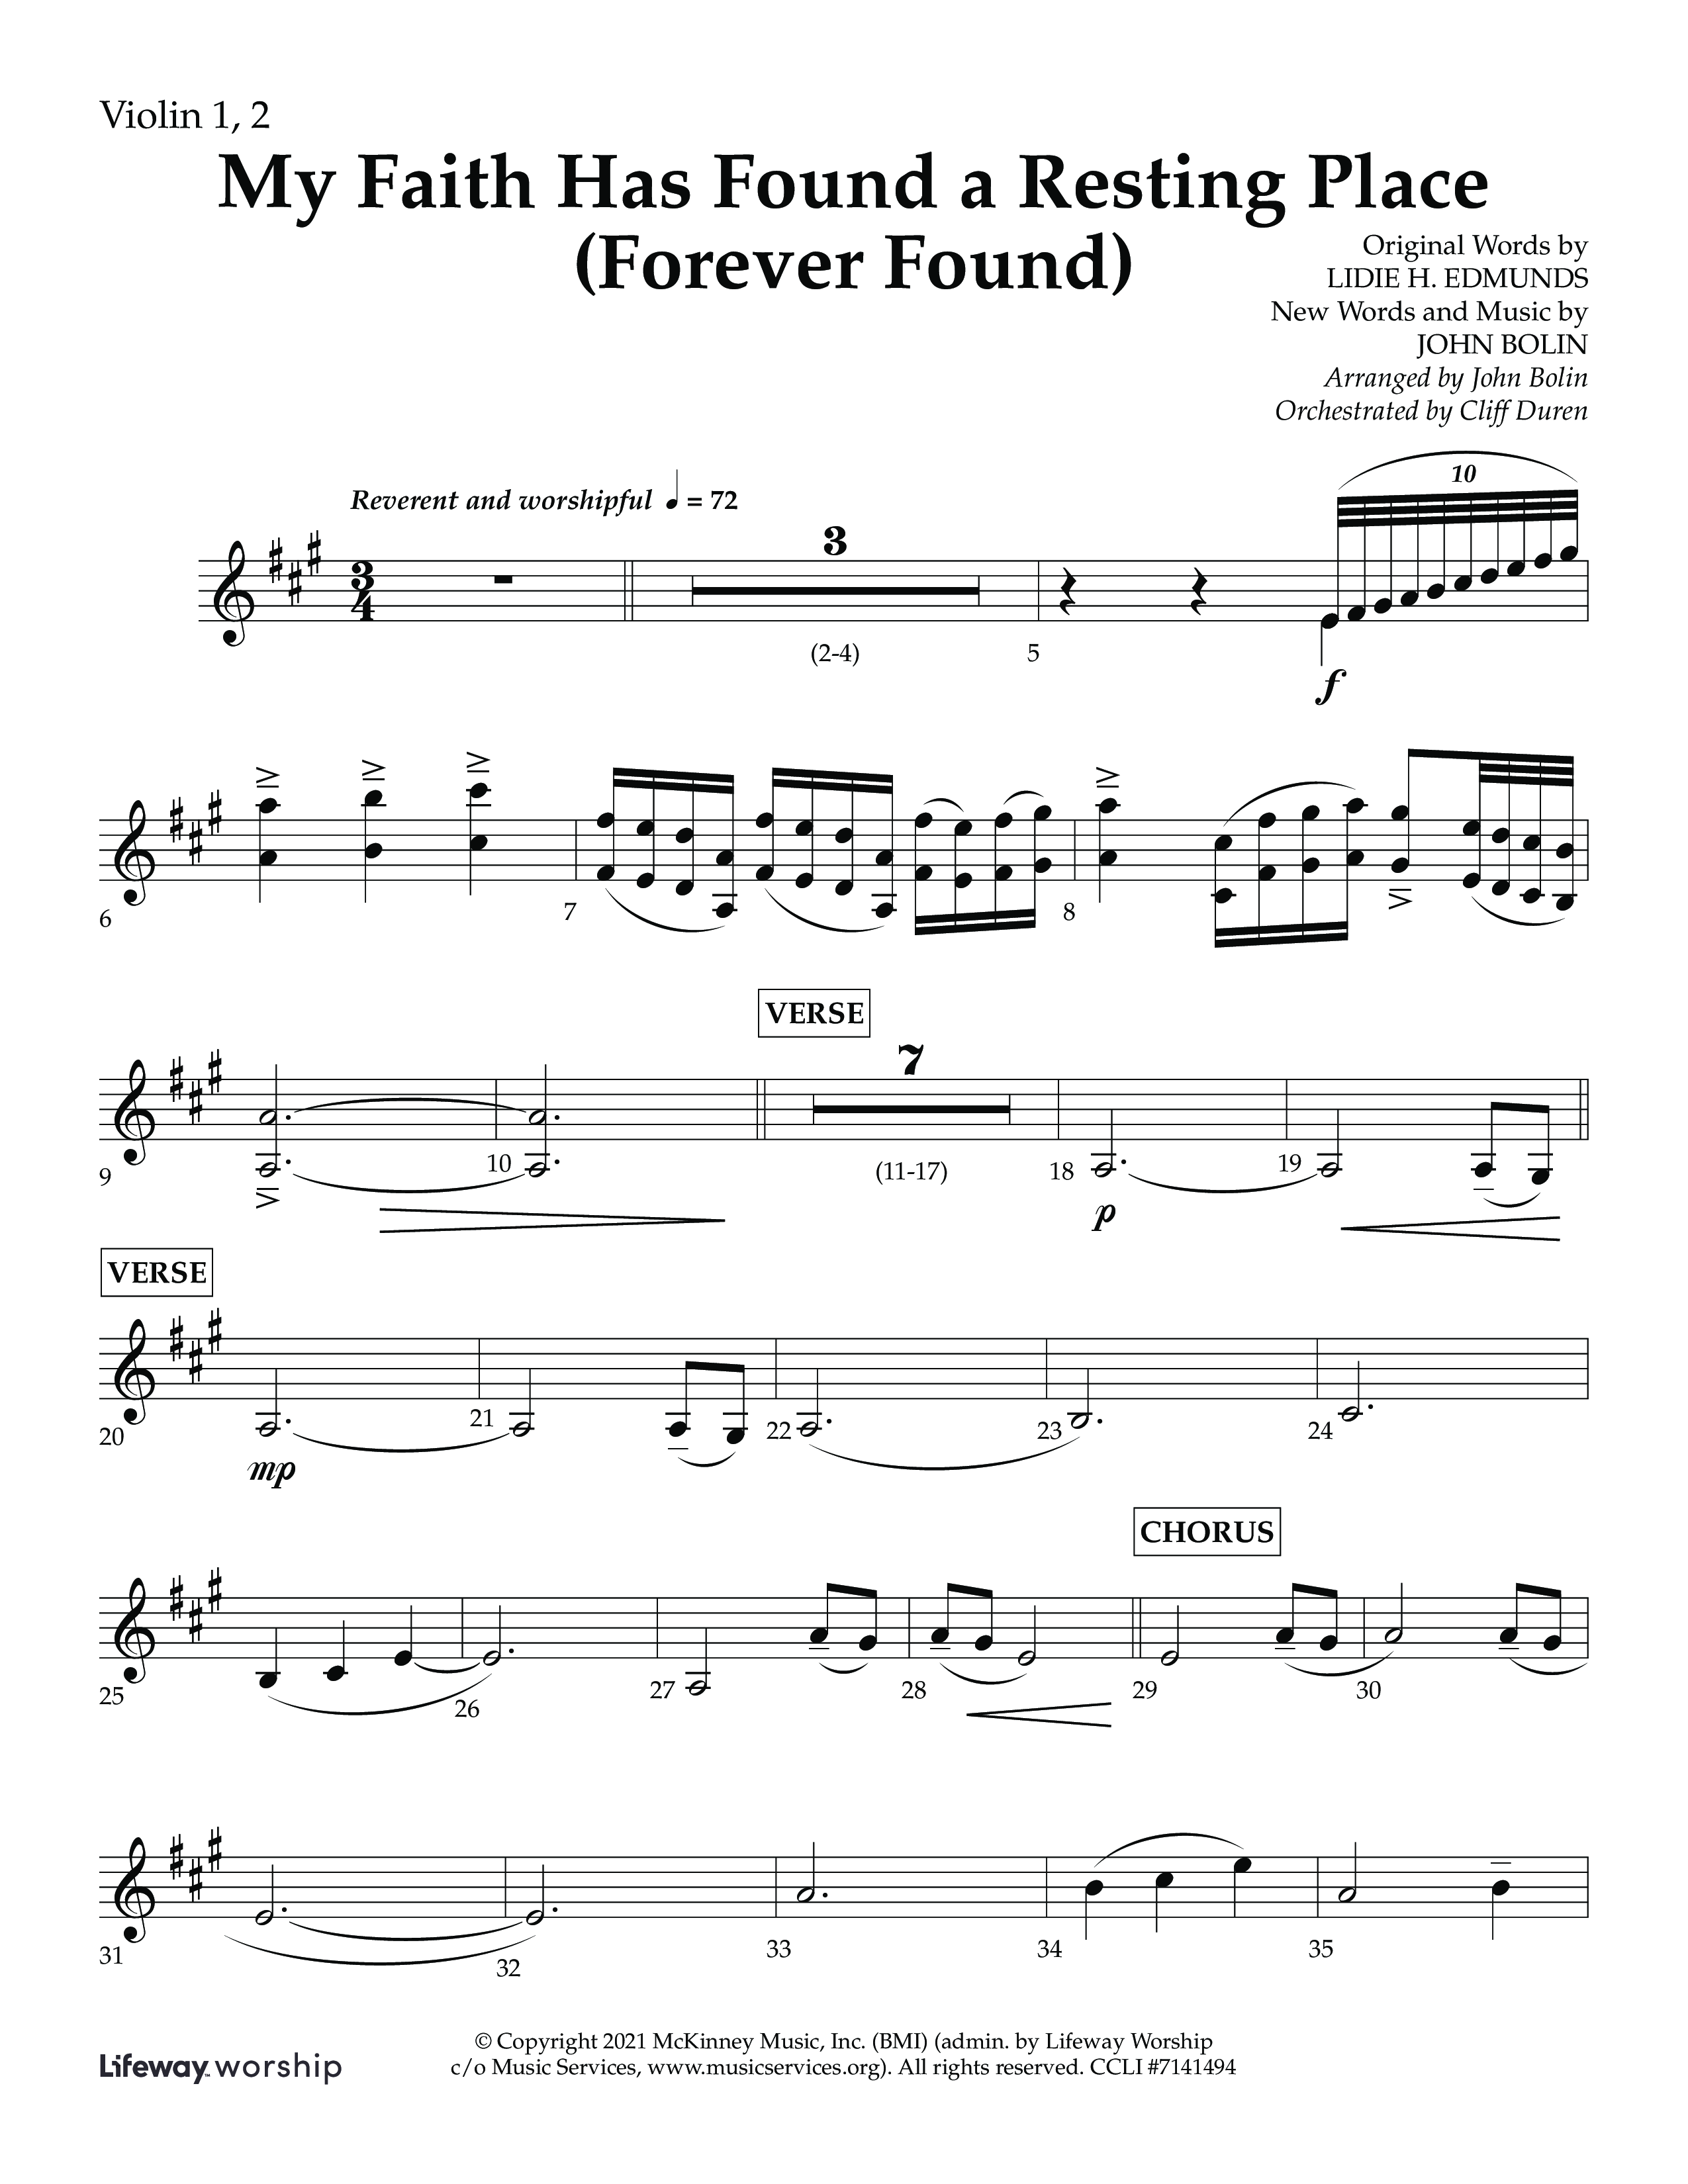 My Faith Has Found a Resting Place (Forever Found) (Choral Anthem SATB) Violin 1/2 (Lifeway Choral / Arr. John Bolin / Orch. Cliff Duren)